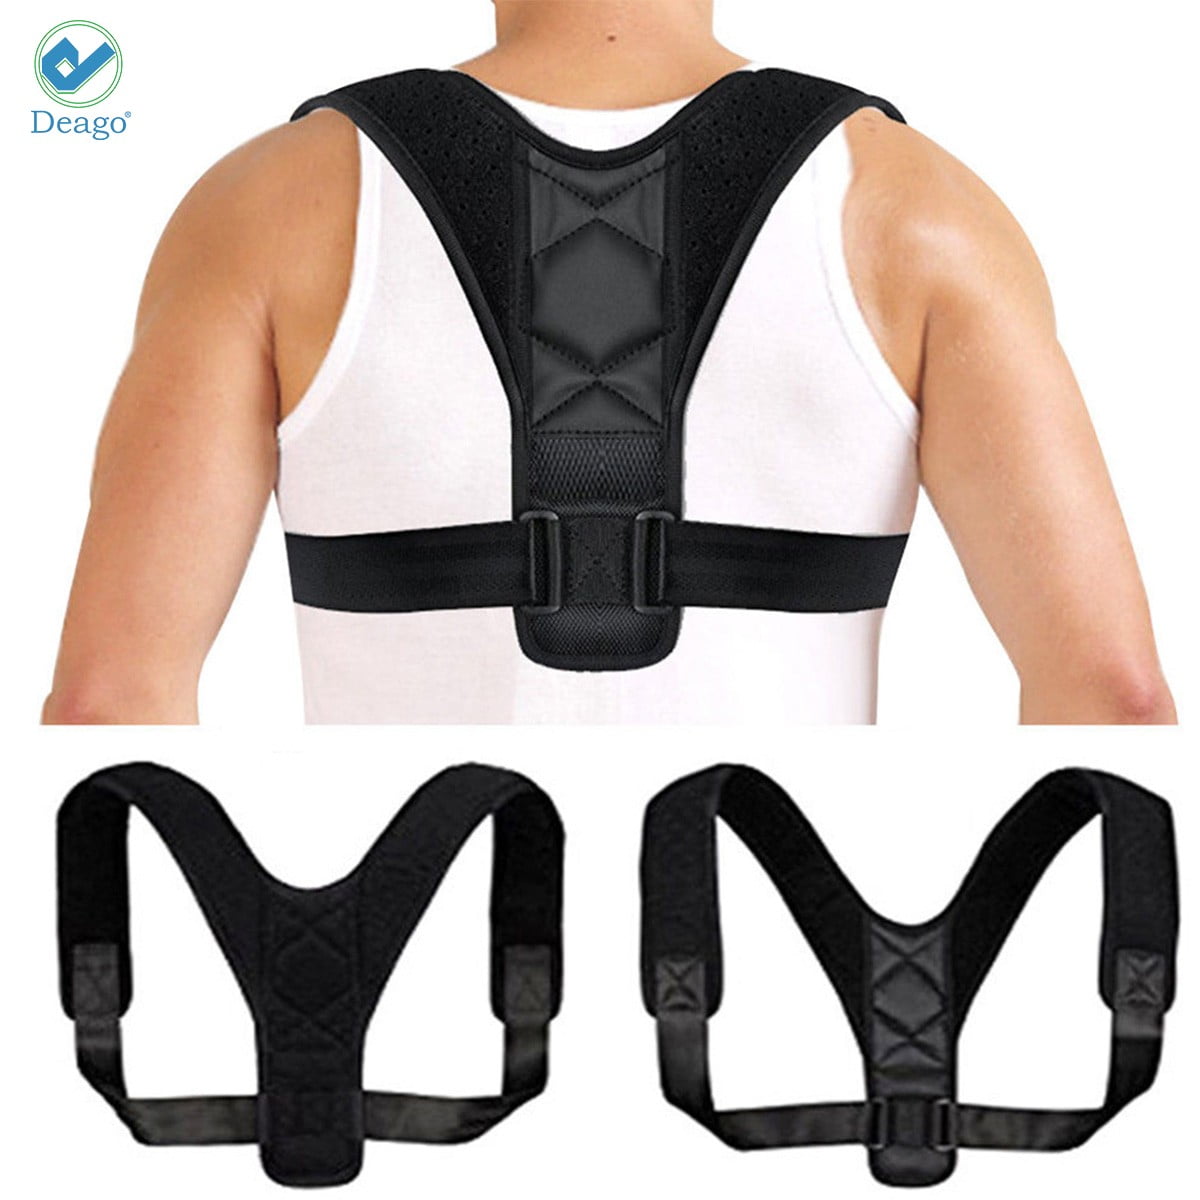 Deago Posture Corrector for Men and Women Upper Back Brace Clavicle Support  Device for Thoracic Kyphosis and Shoulder Neck Pain Relief (Size XL)